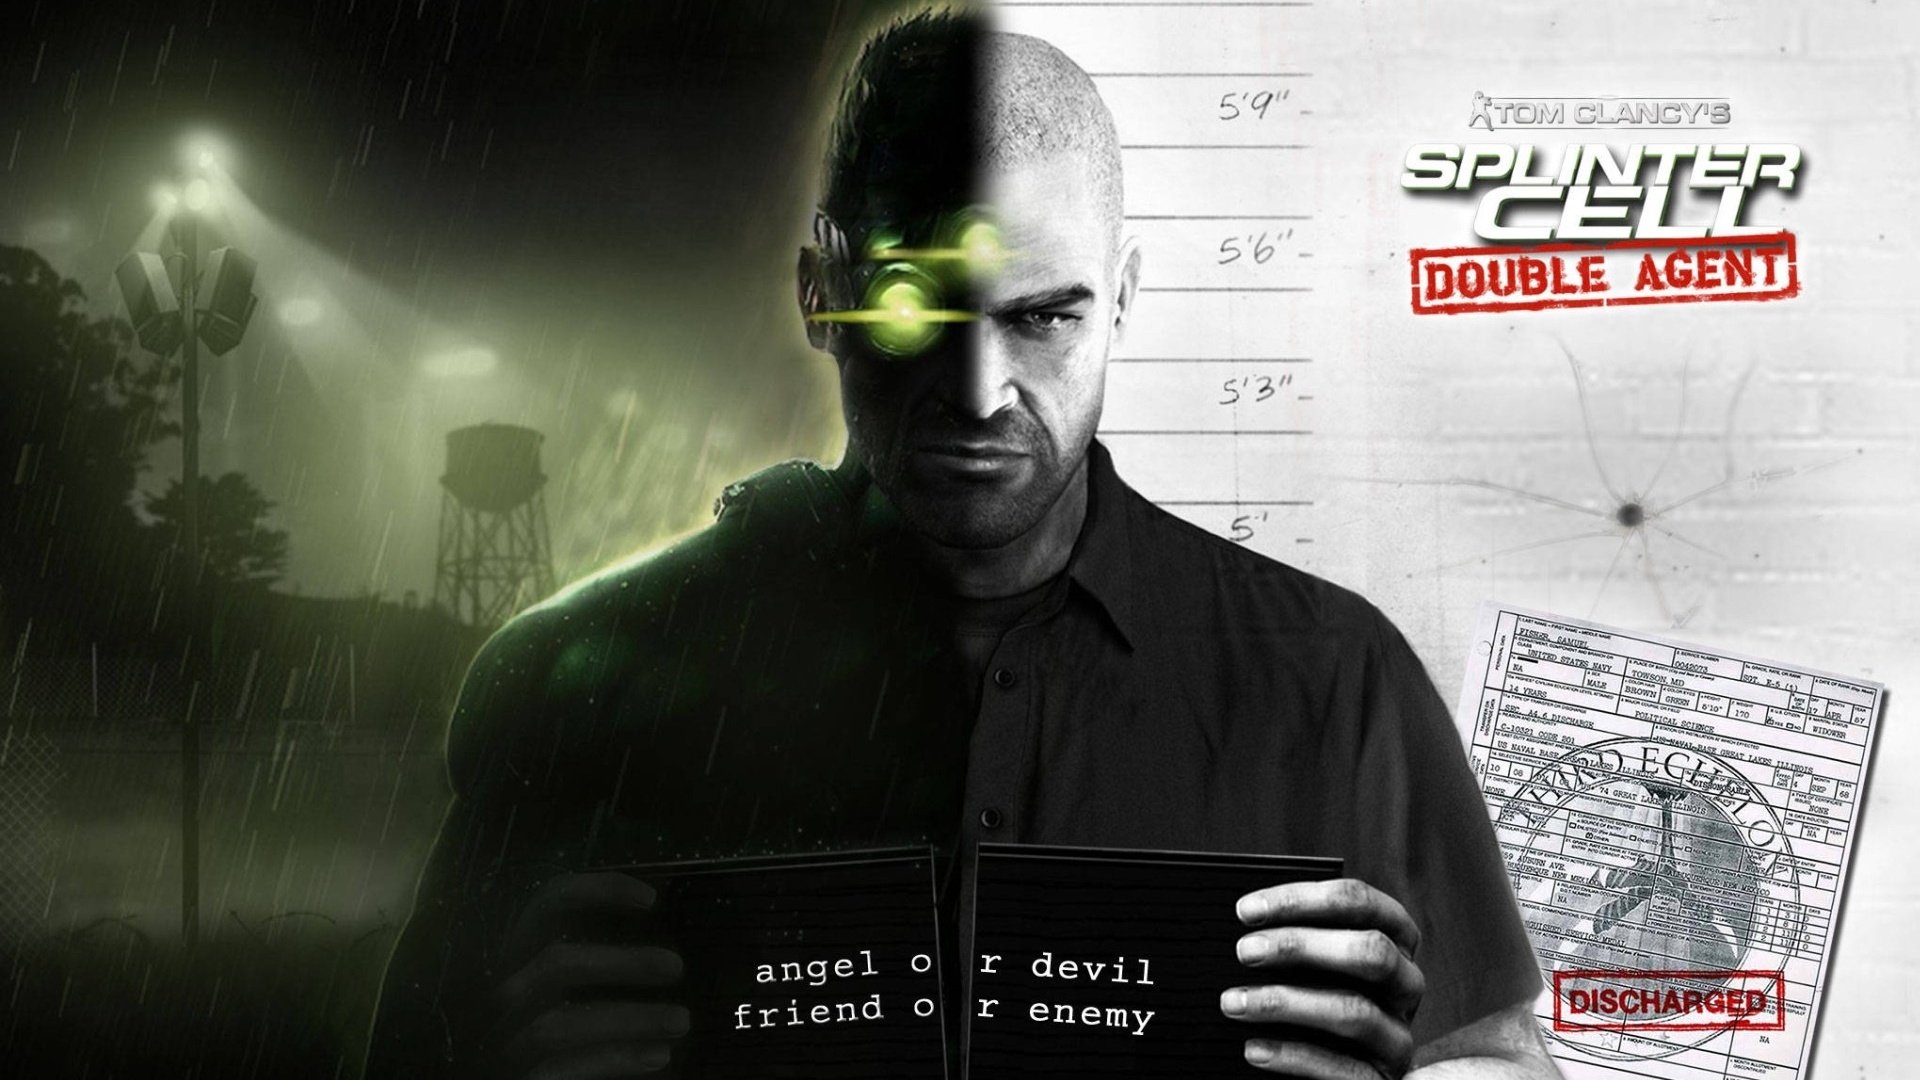 Tom Clancy's Splinter Cell Double Agent® on Steam